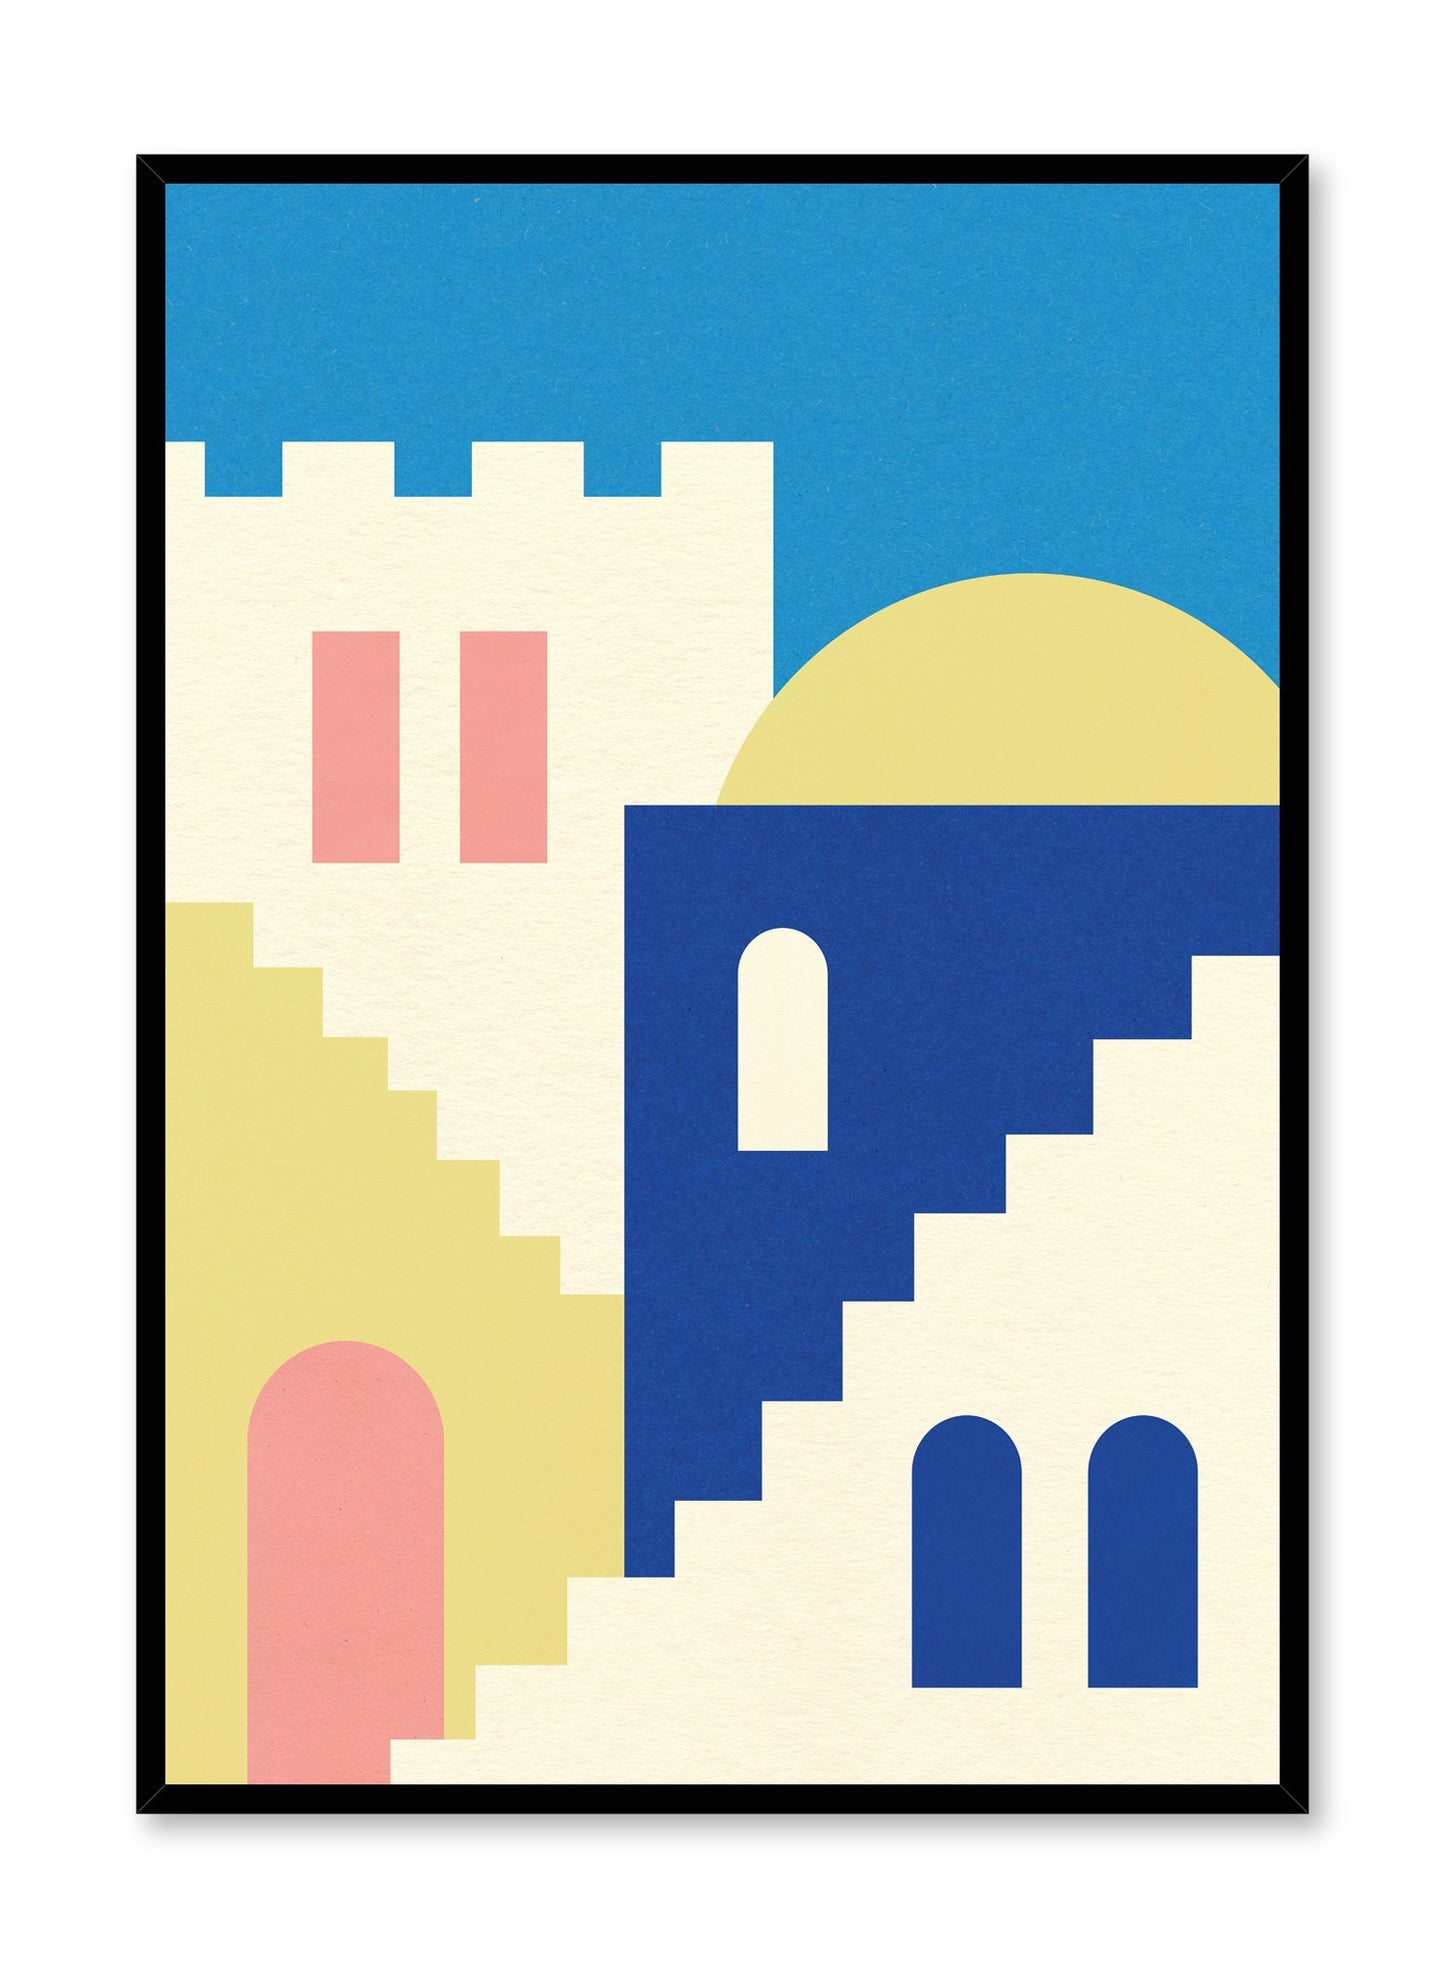 Minimalist pop art paper illustration by German artist Rosi Feist with stairs and architecture of Morocco